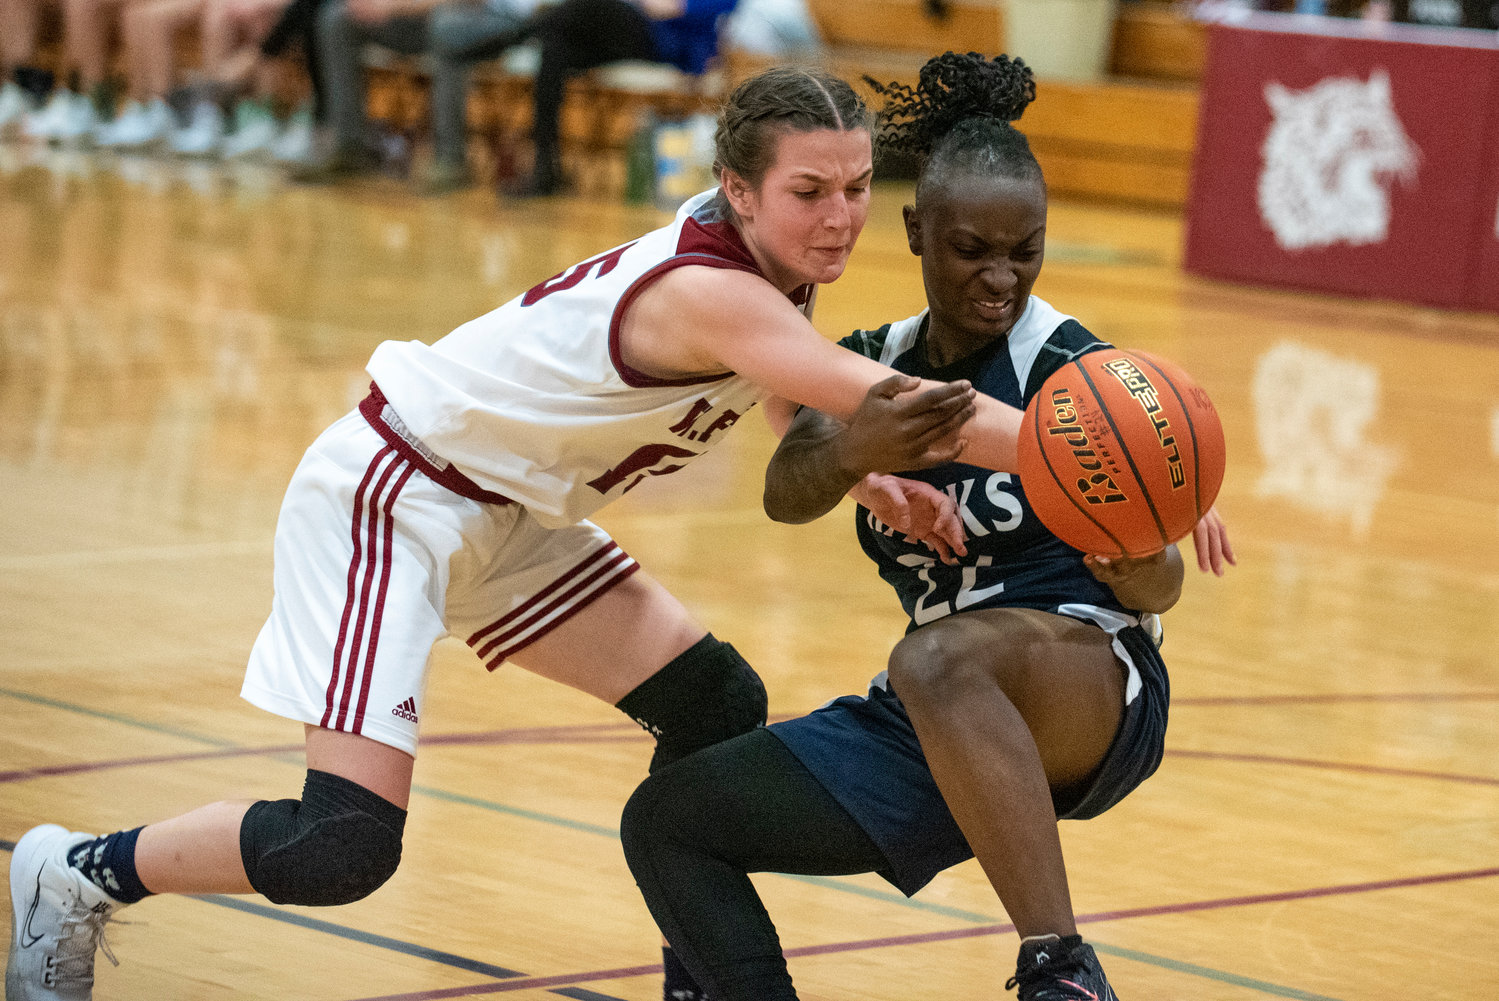 W.F. West's Amanda Bennett (15) steals the ball from River Ridge's Marsani Cannon (22) during full-court press on Dec. 14.